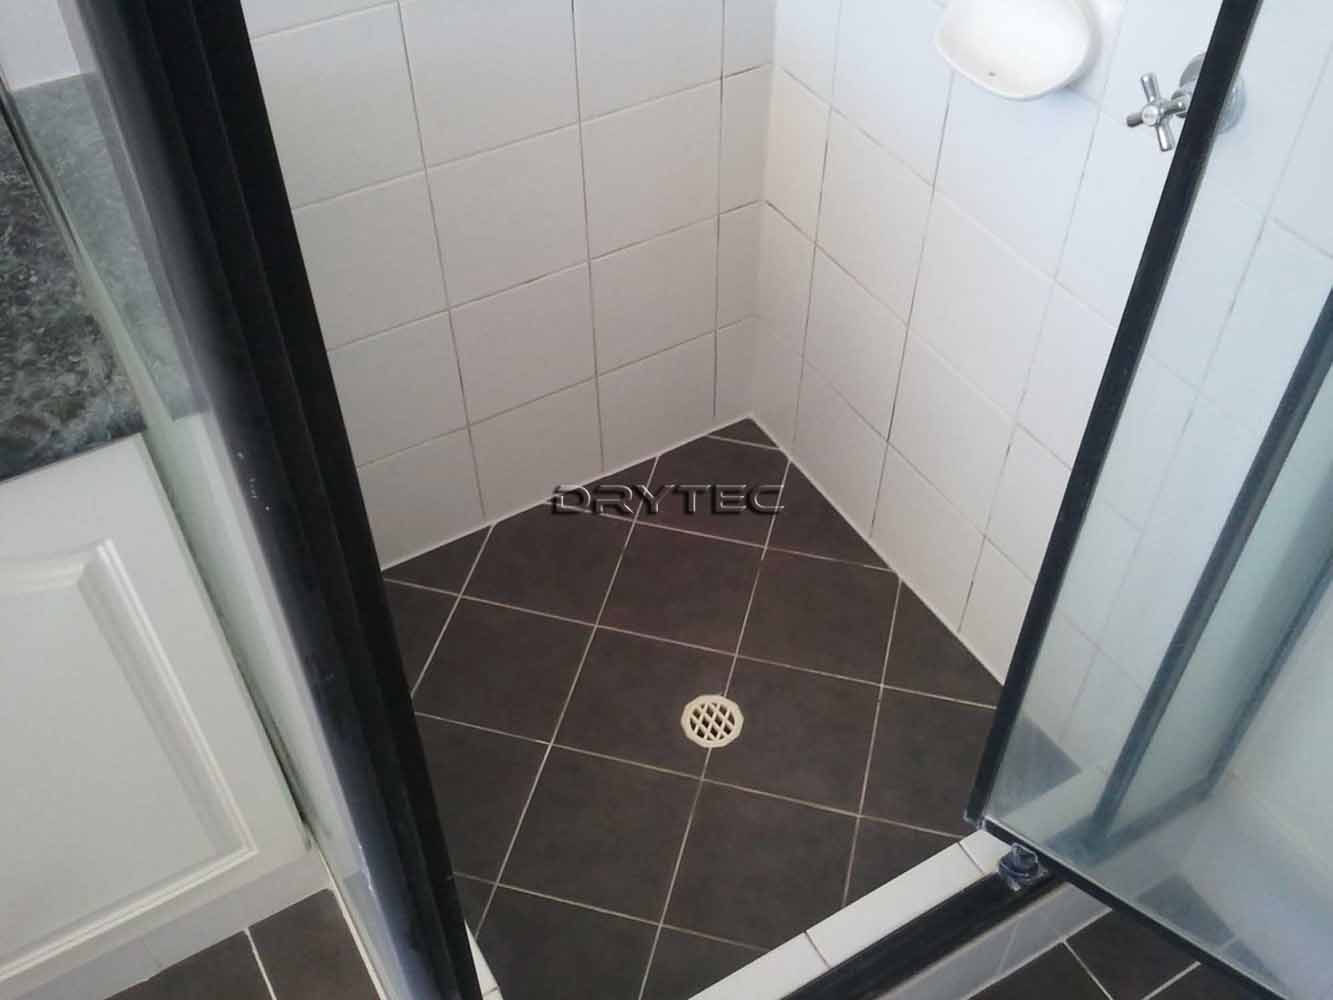 Leaking Shower Repairs and Regrouting Services in Perth WA